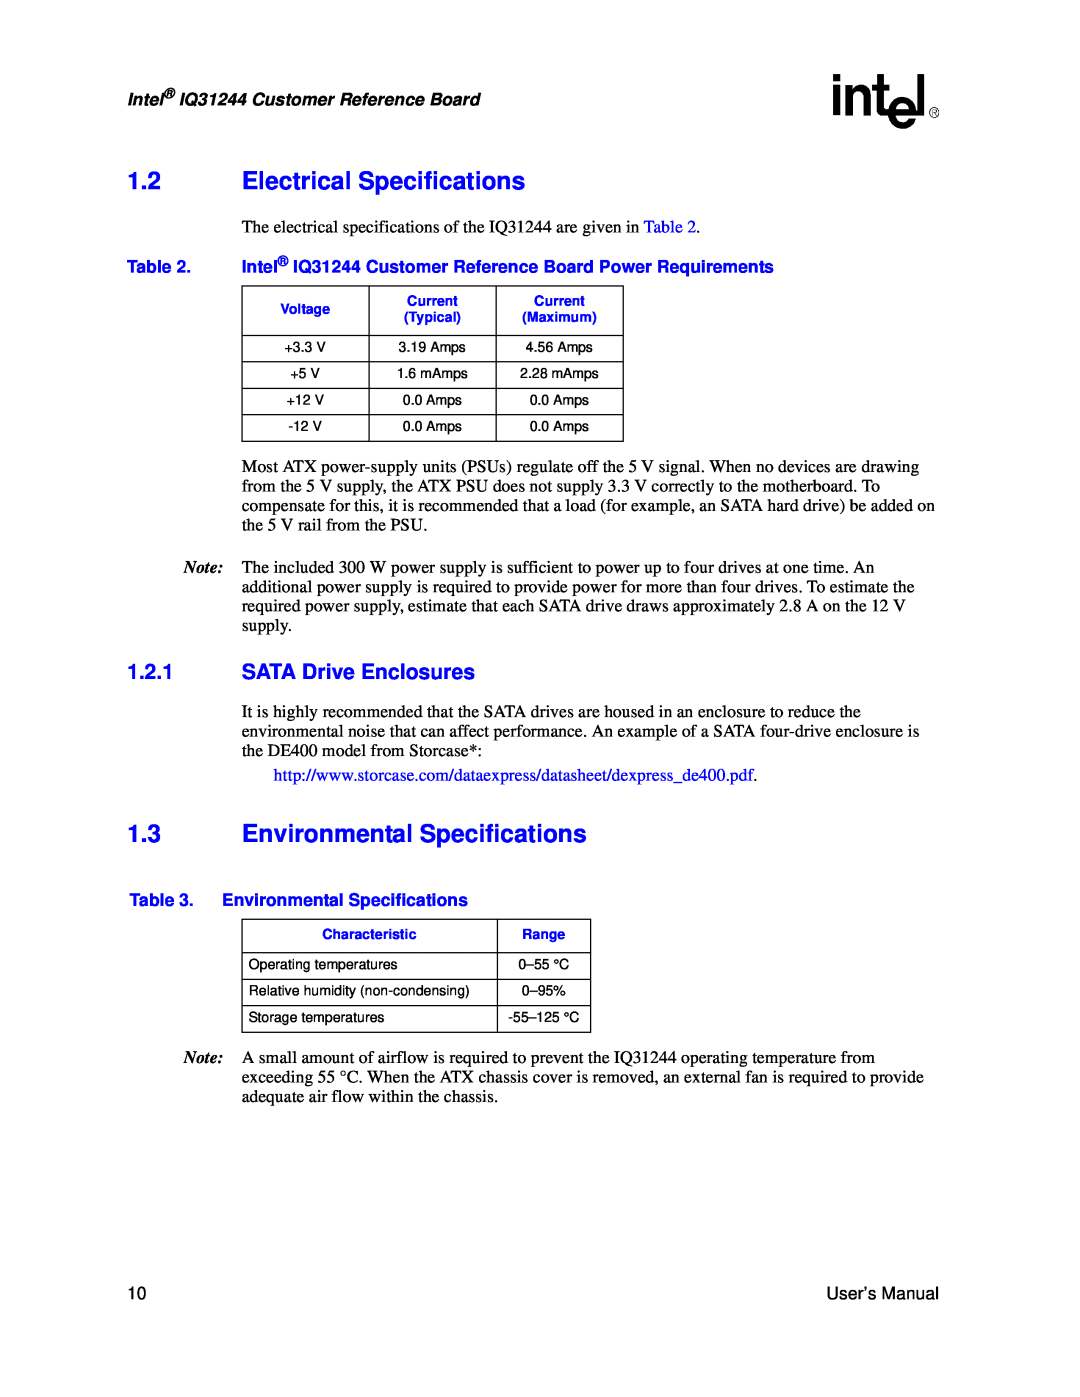 Intel IQ31244 user manual 1.2Electrical Specifications, 1.3Environmental Specifications, 1.2.1SATA Drive Enclosures 